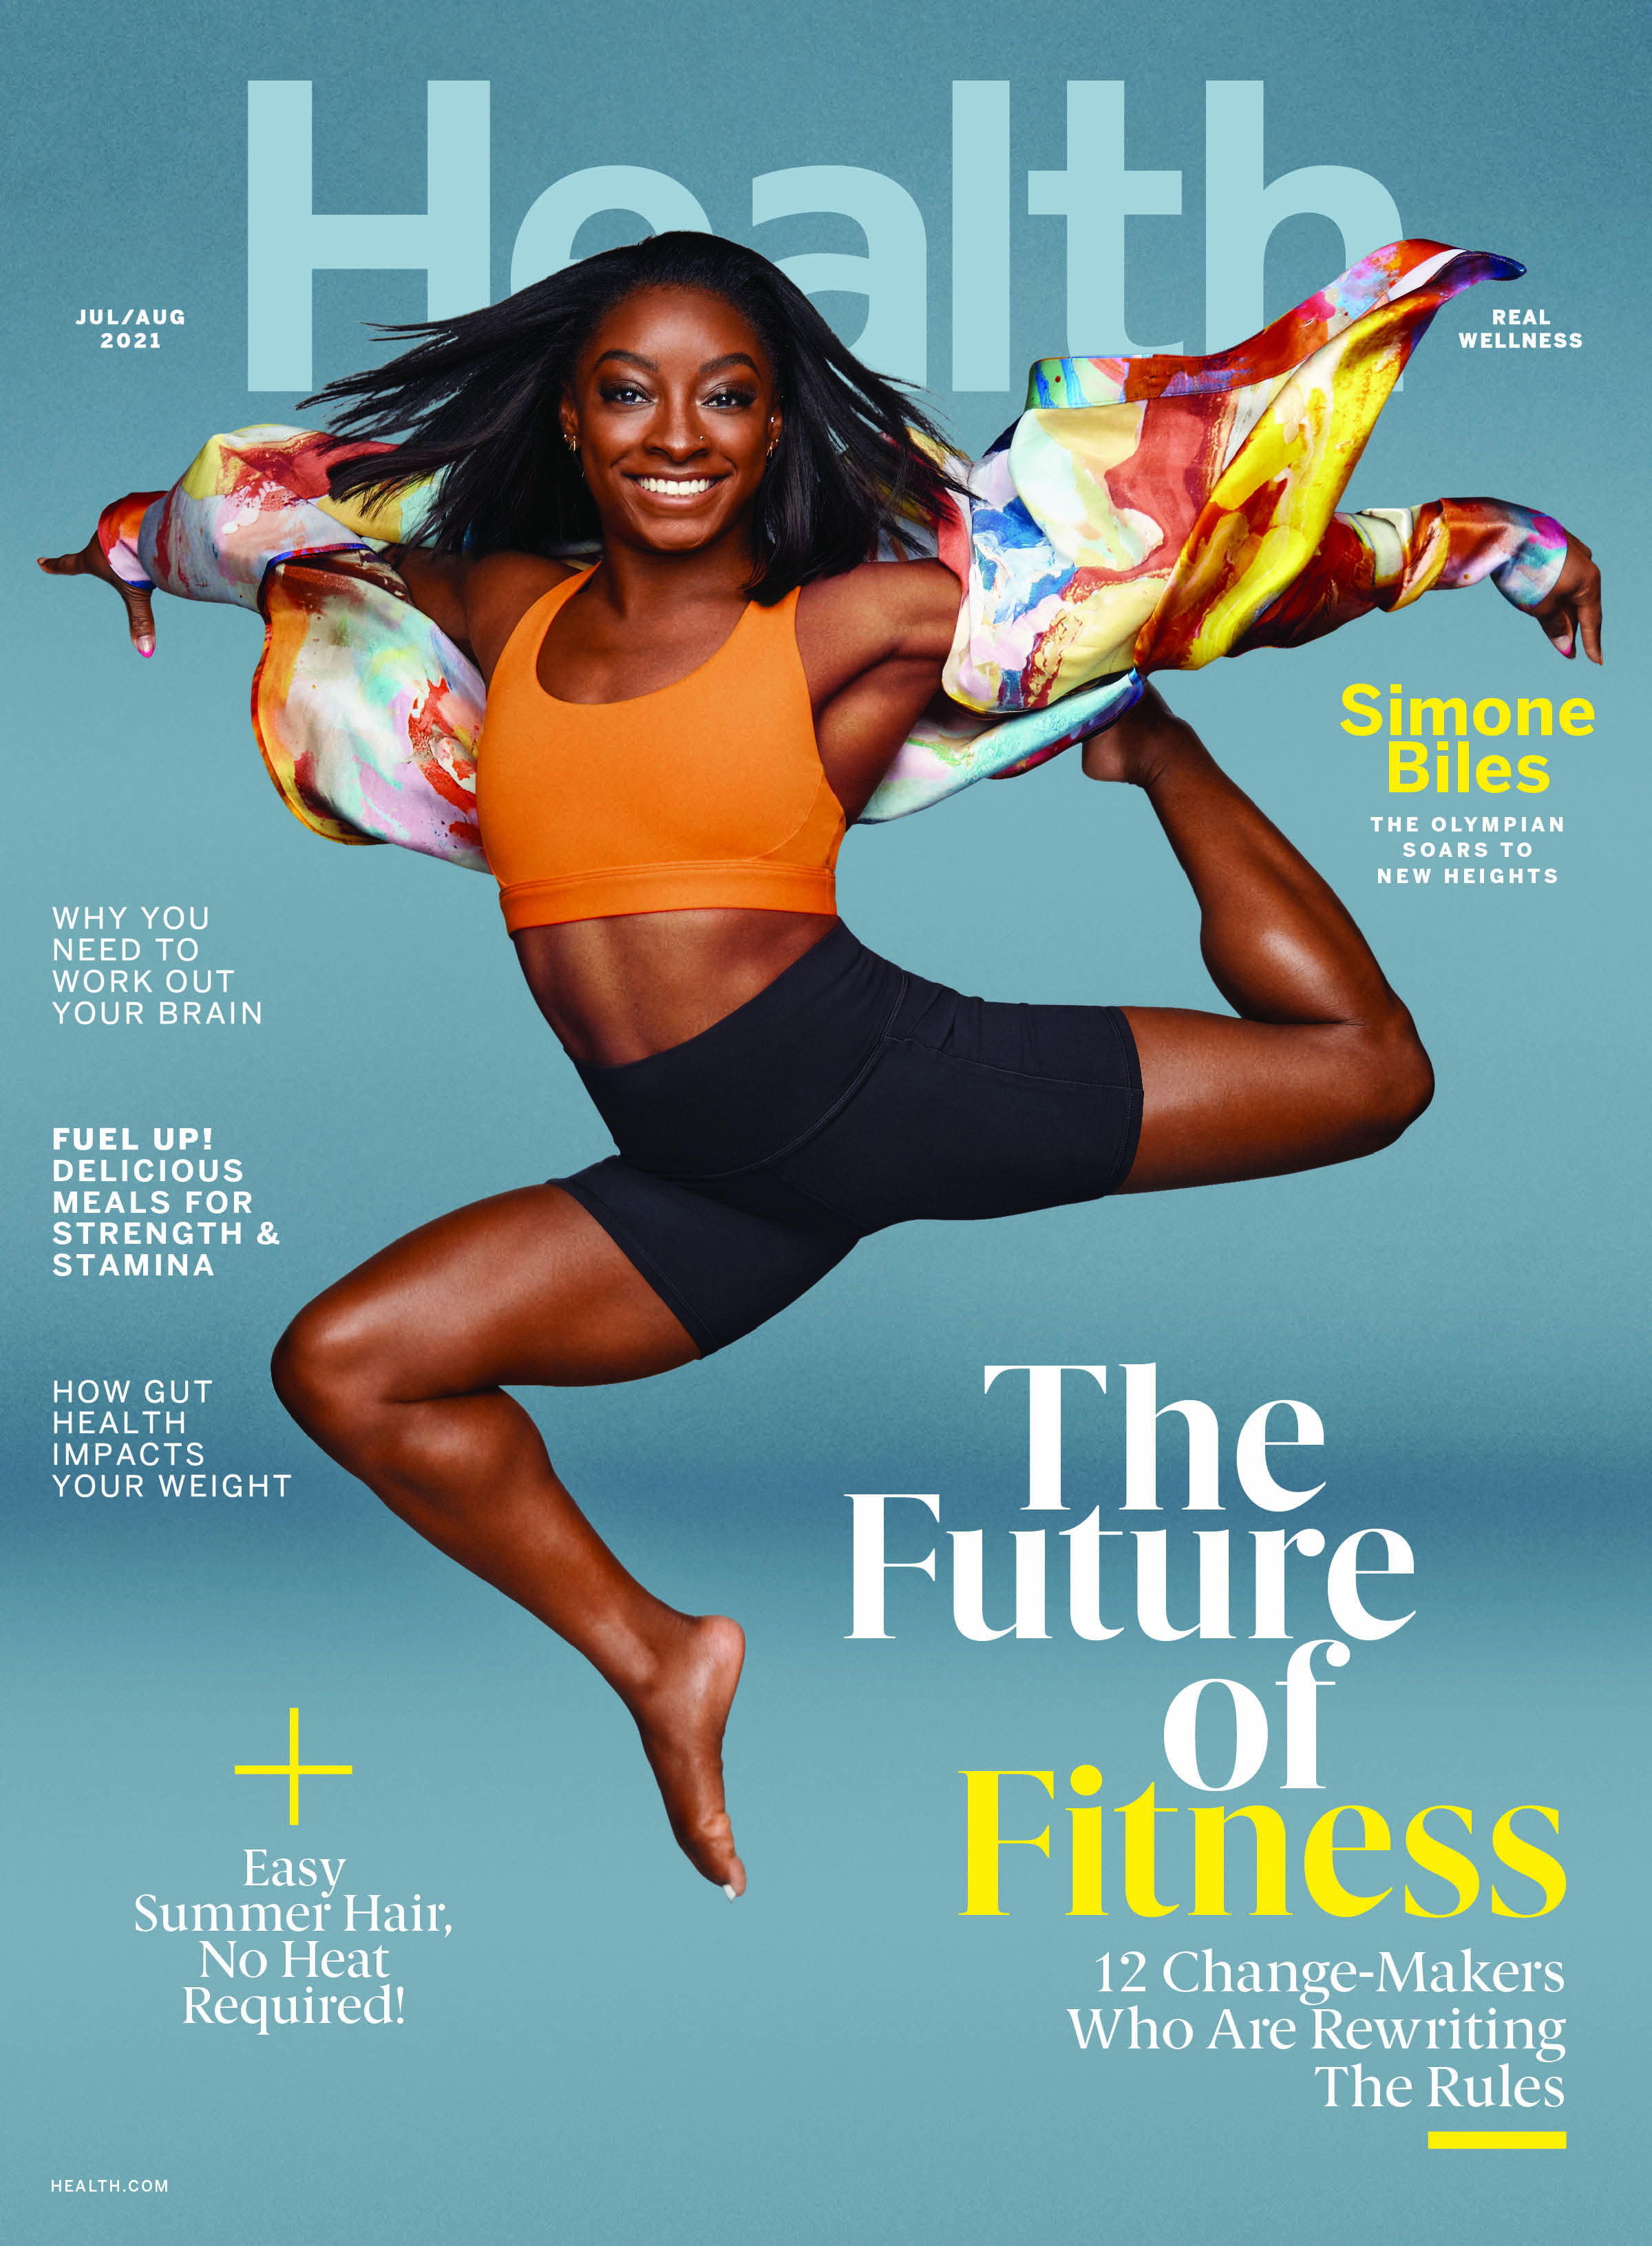 Health - "The Future of Fitness," July/August 2021